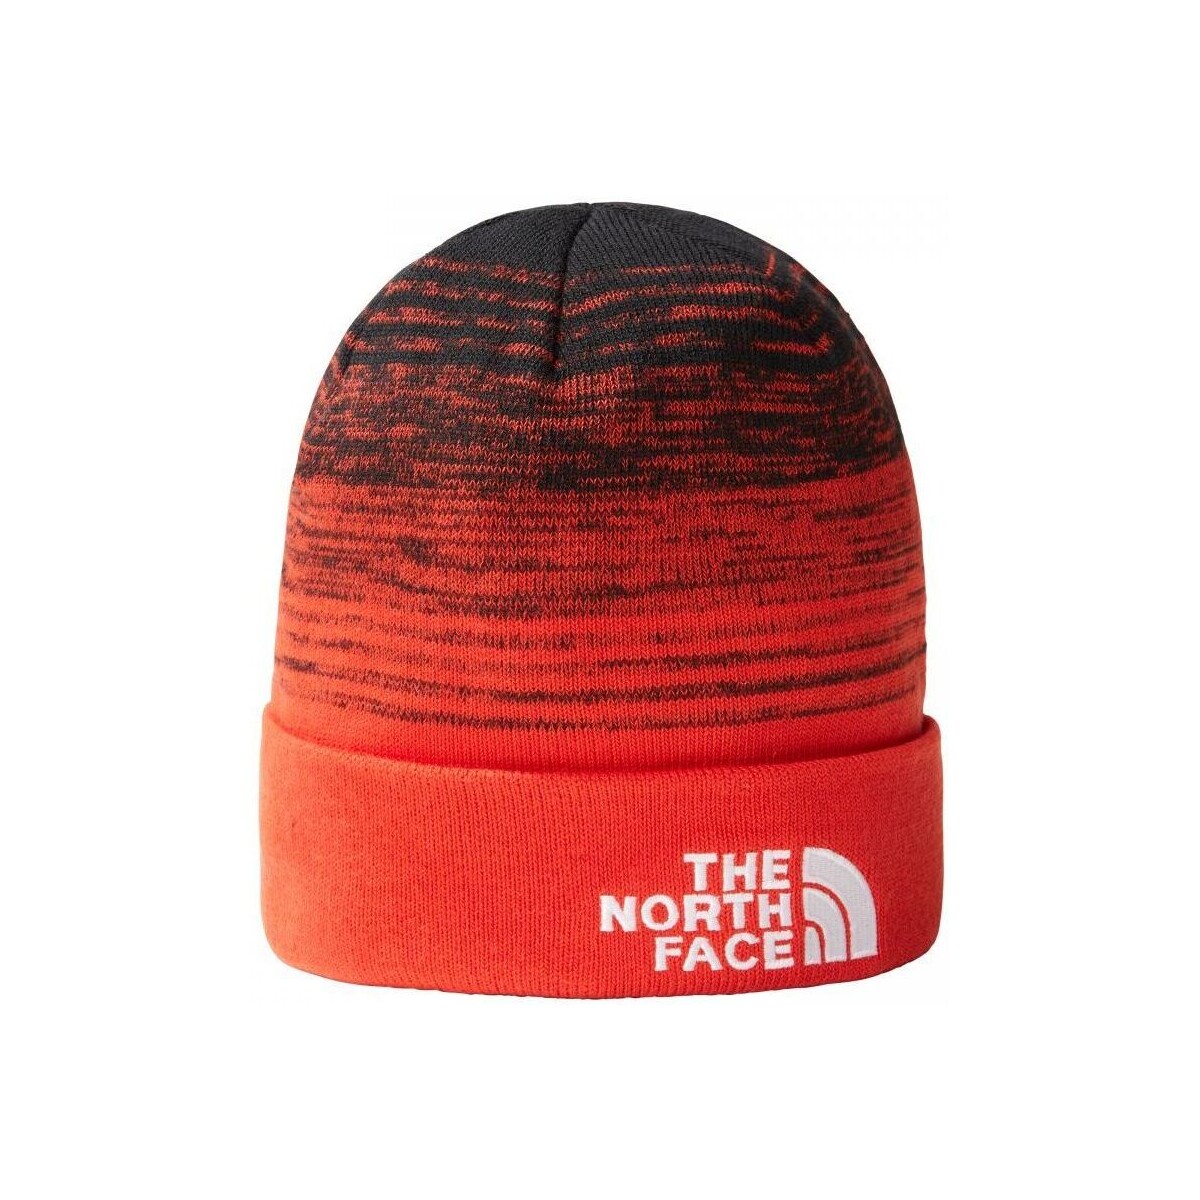 Accessoires textile Chapeaux The North Face NF0A3FNTTJ21 - DOCKWKR RCYLD BEANIE-TNF BLACK-FIERY RED Rouge